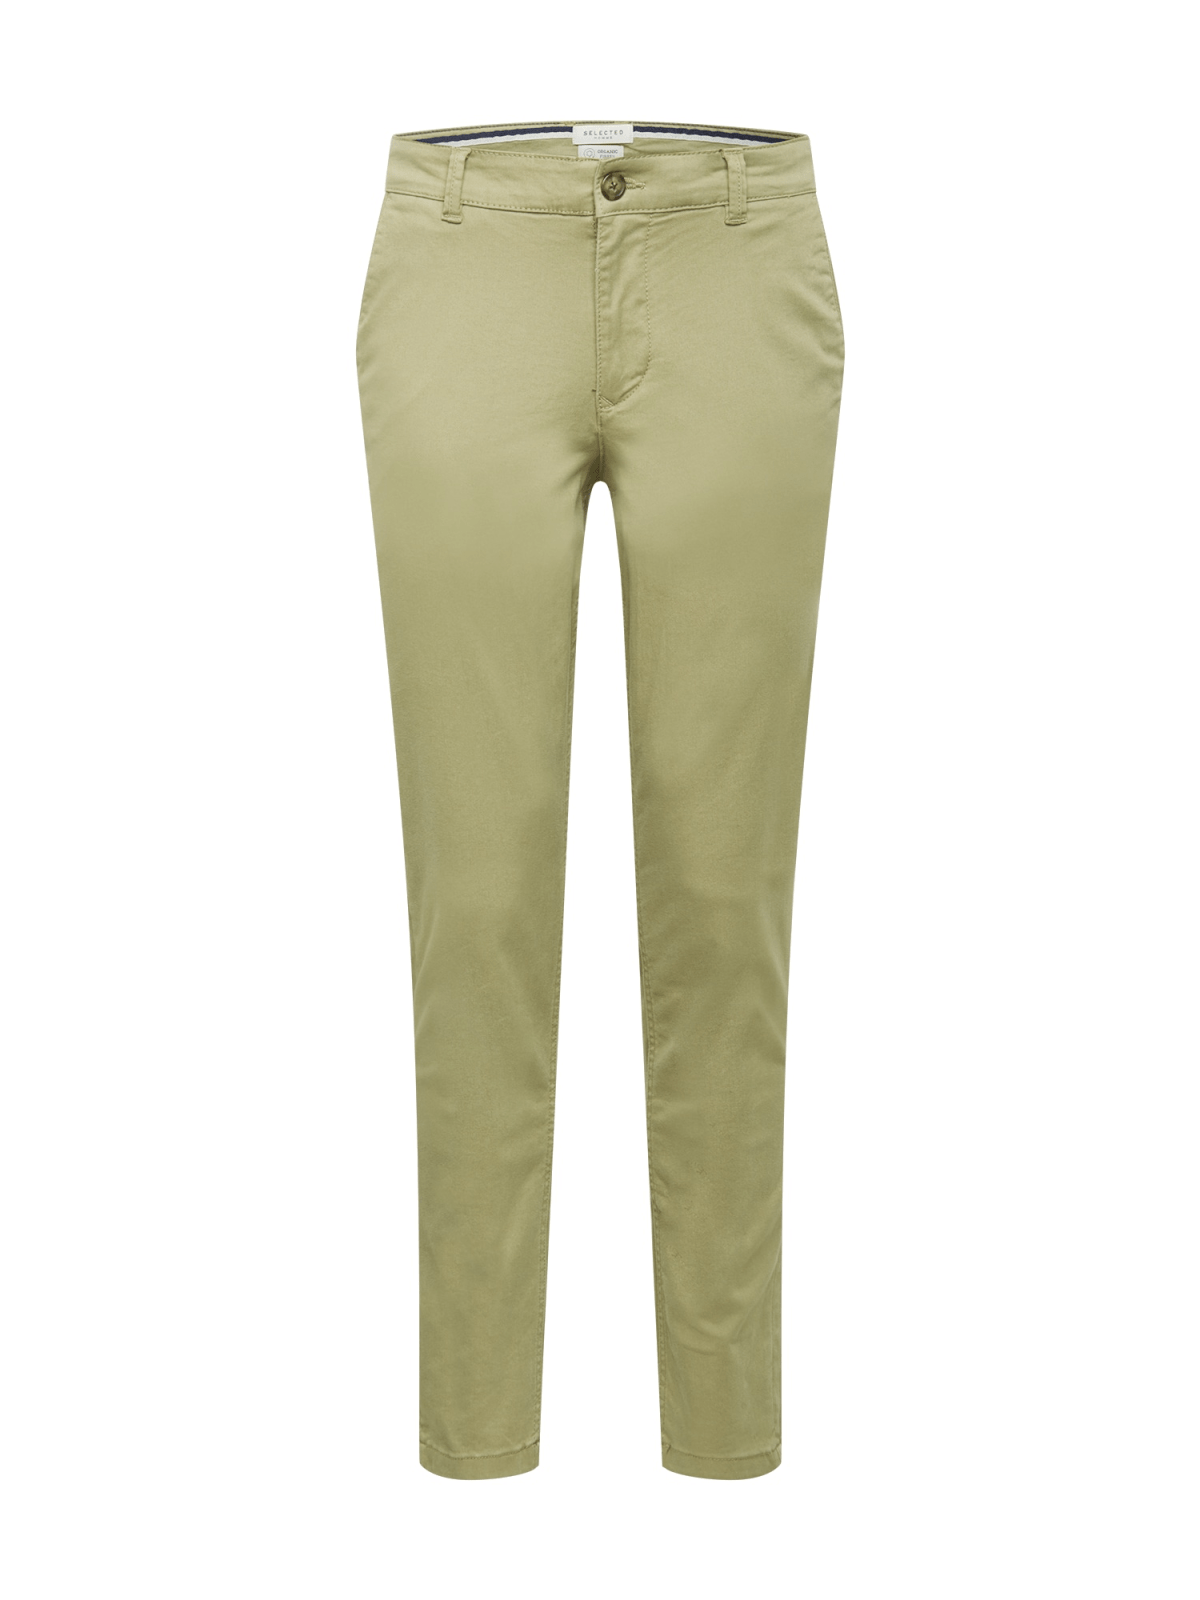 SELECTED HOMME Chino hlače  oliva